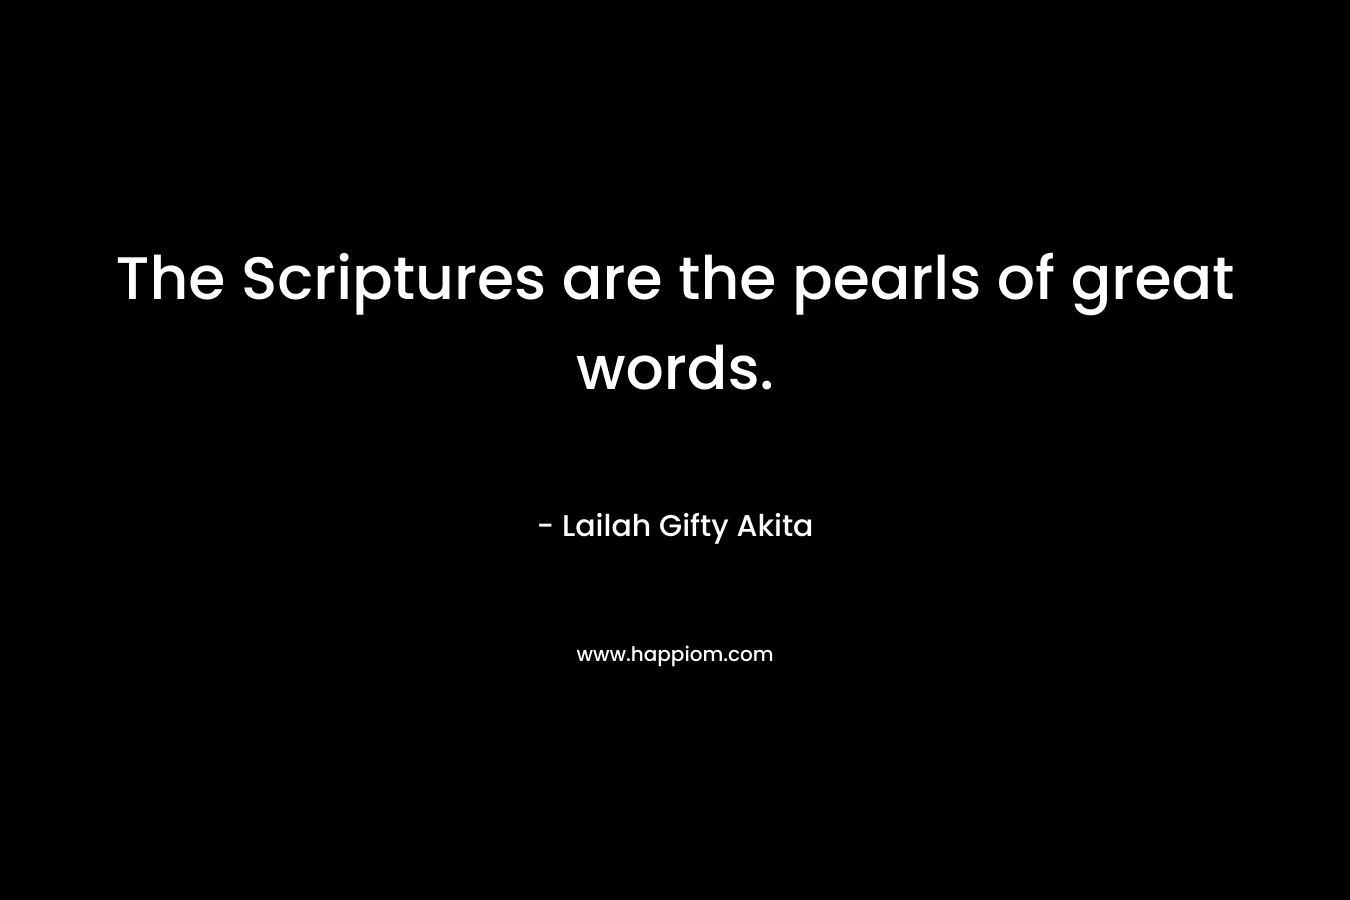 The Scriptures are the pearls of great words.